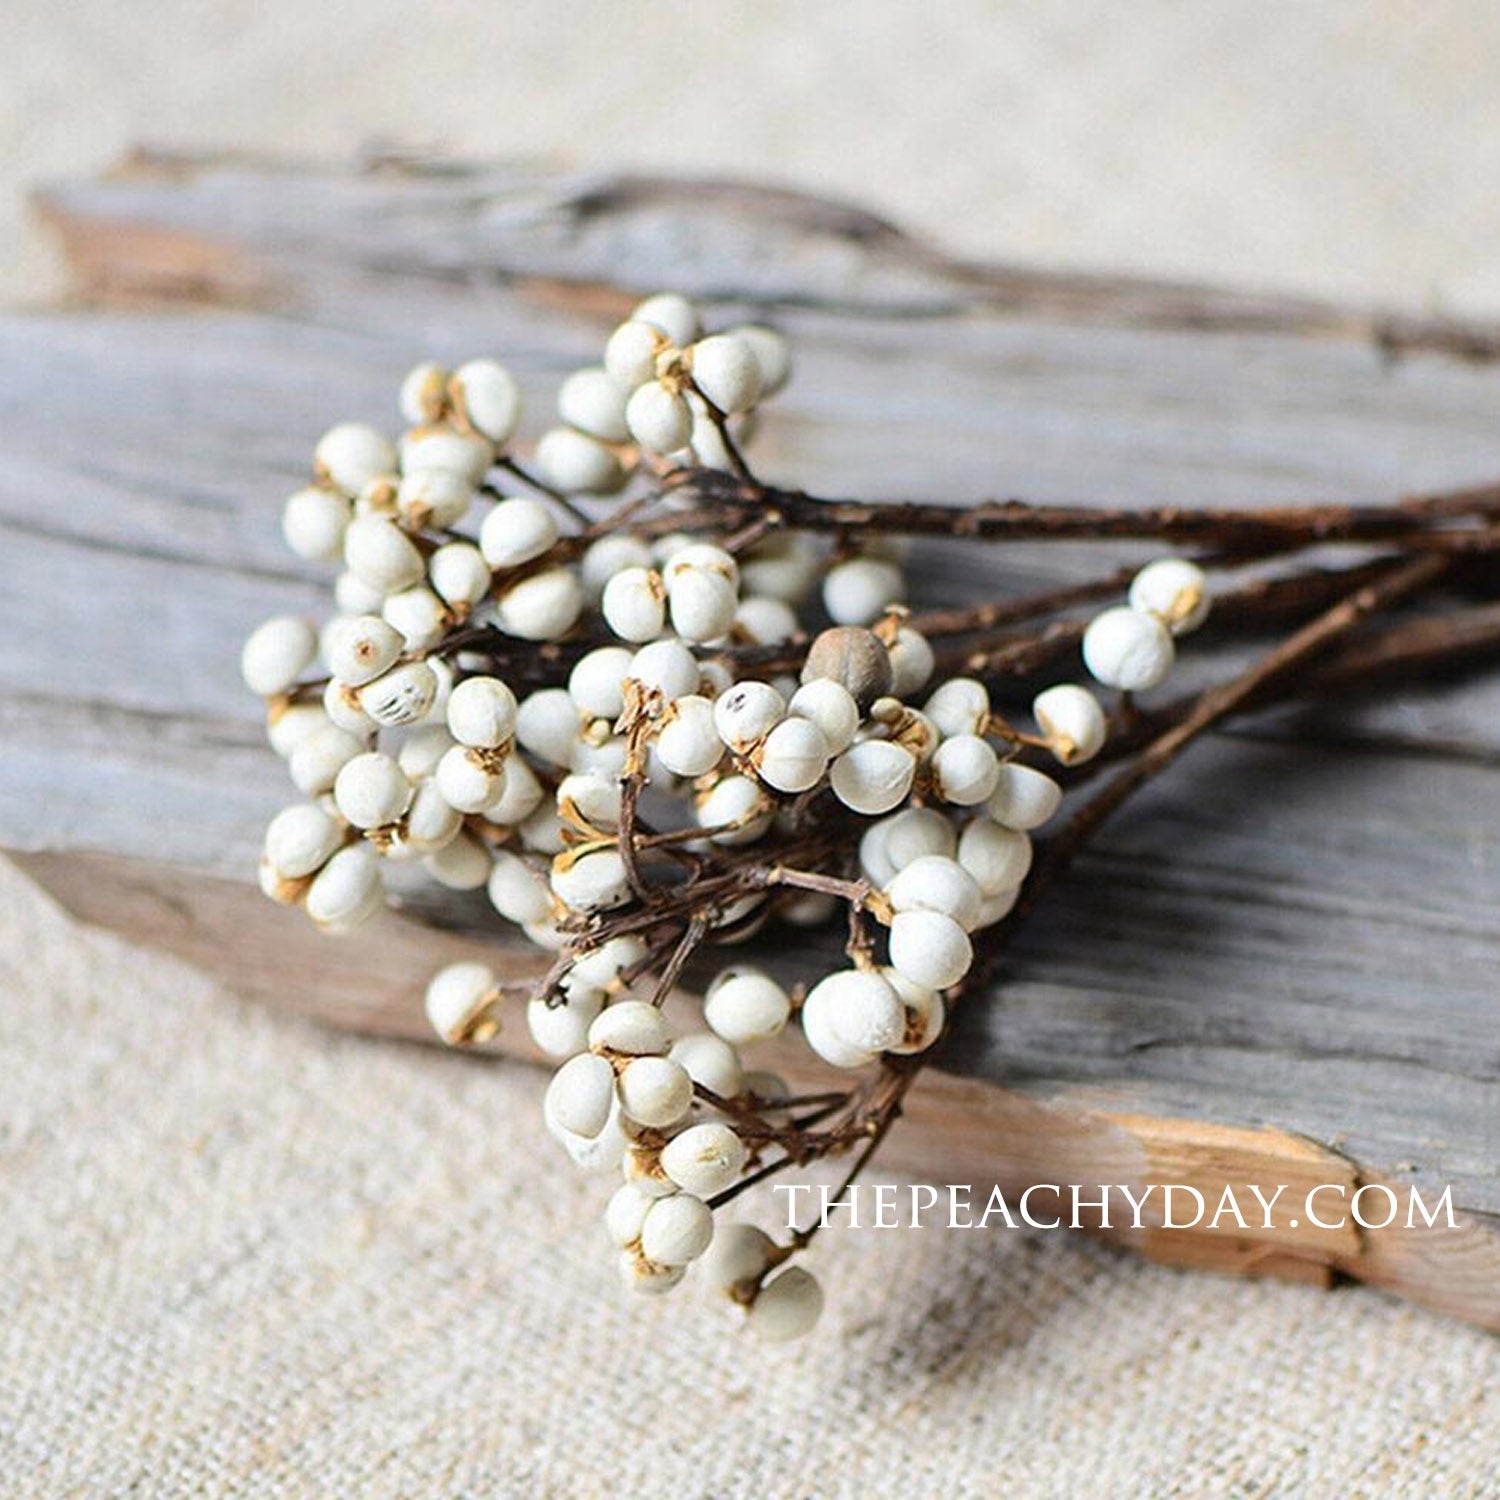  Tallow Berries Dried, Natural Stem Wedding Floral